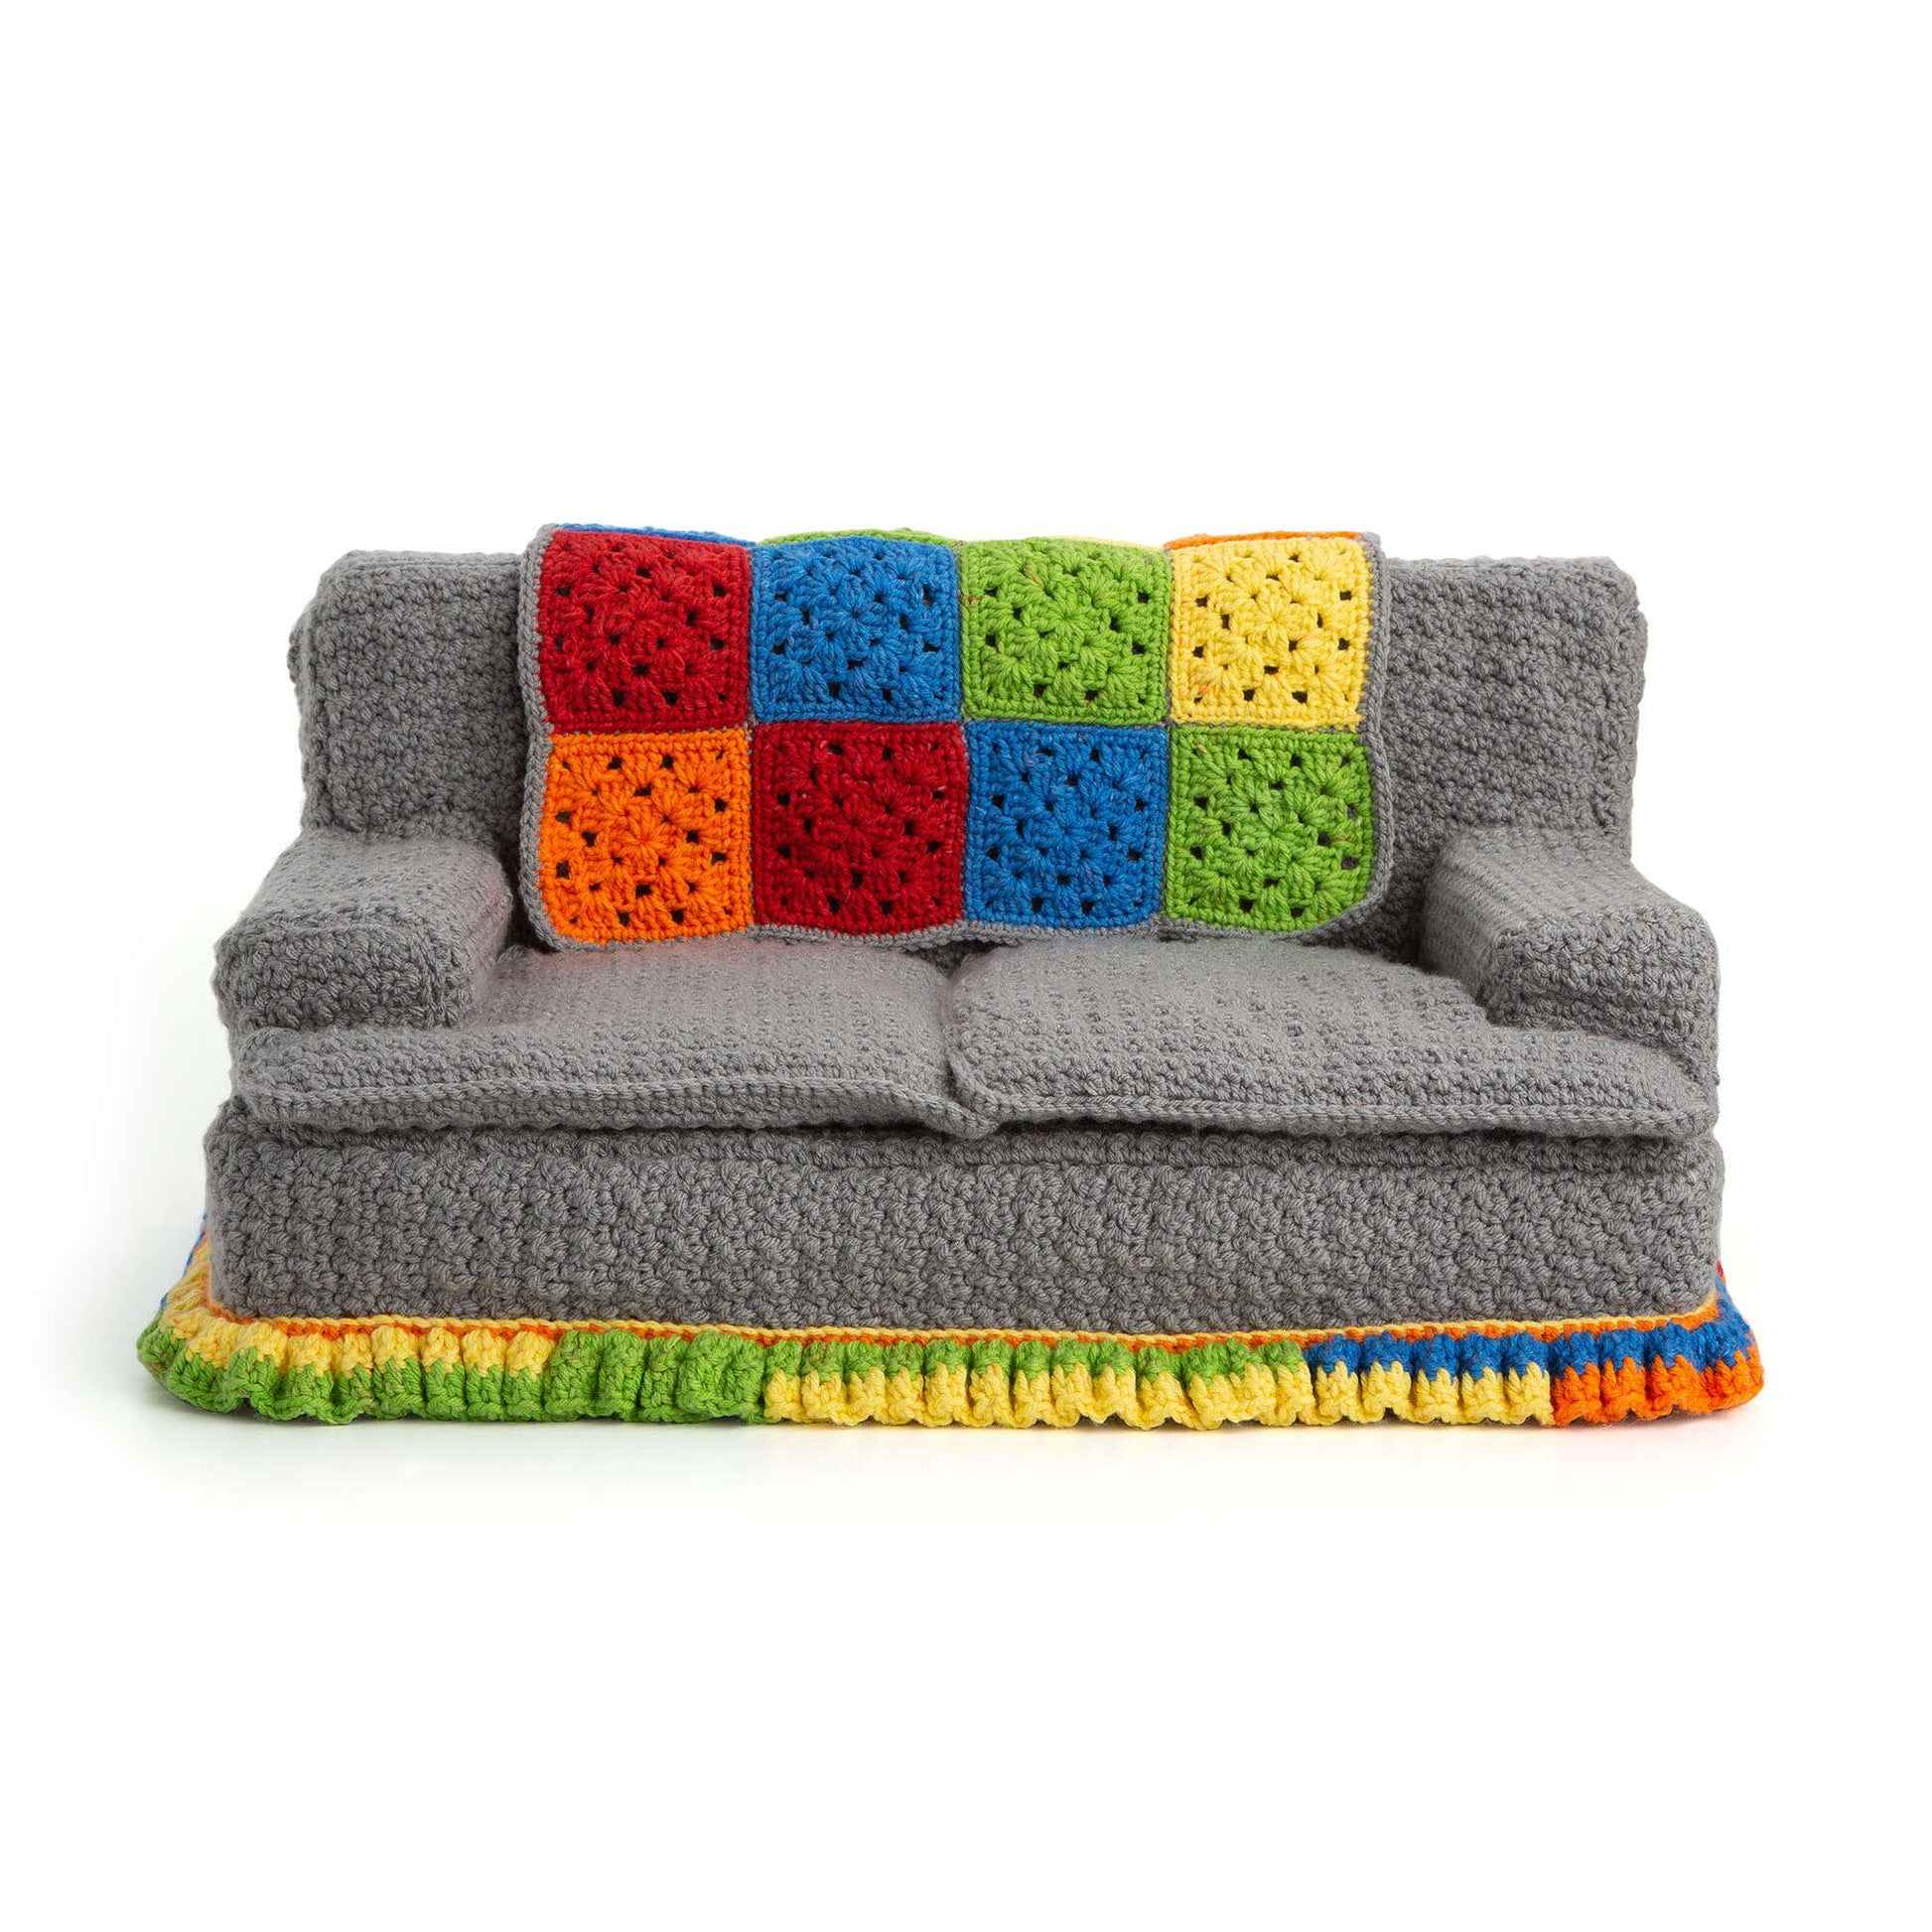 Free Red Heart Crochet Cat Couch Pattern